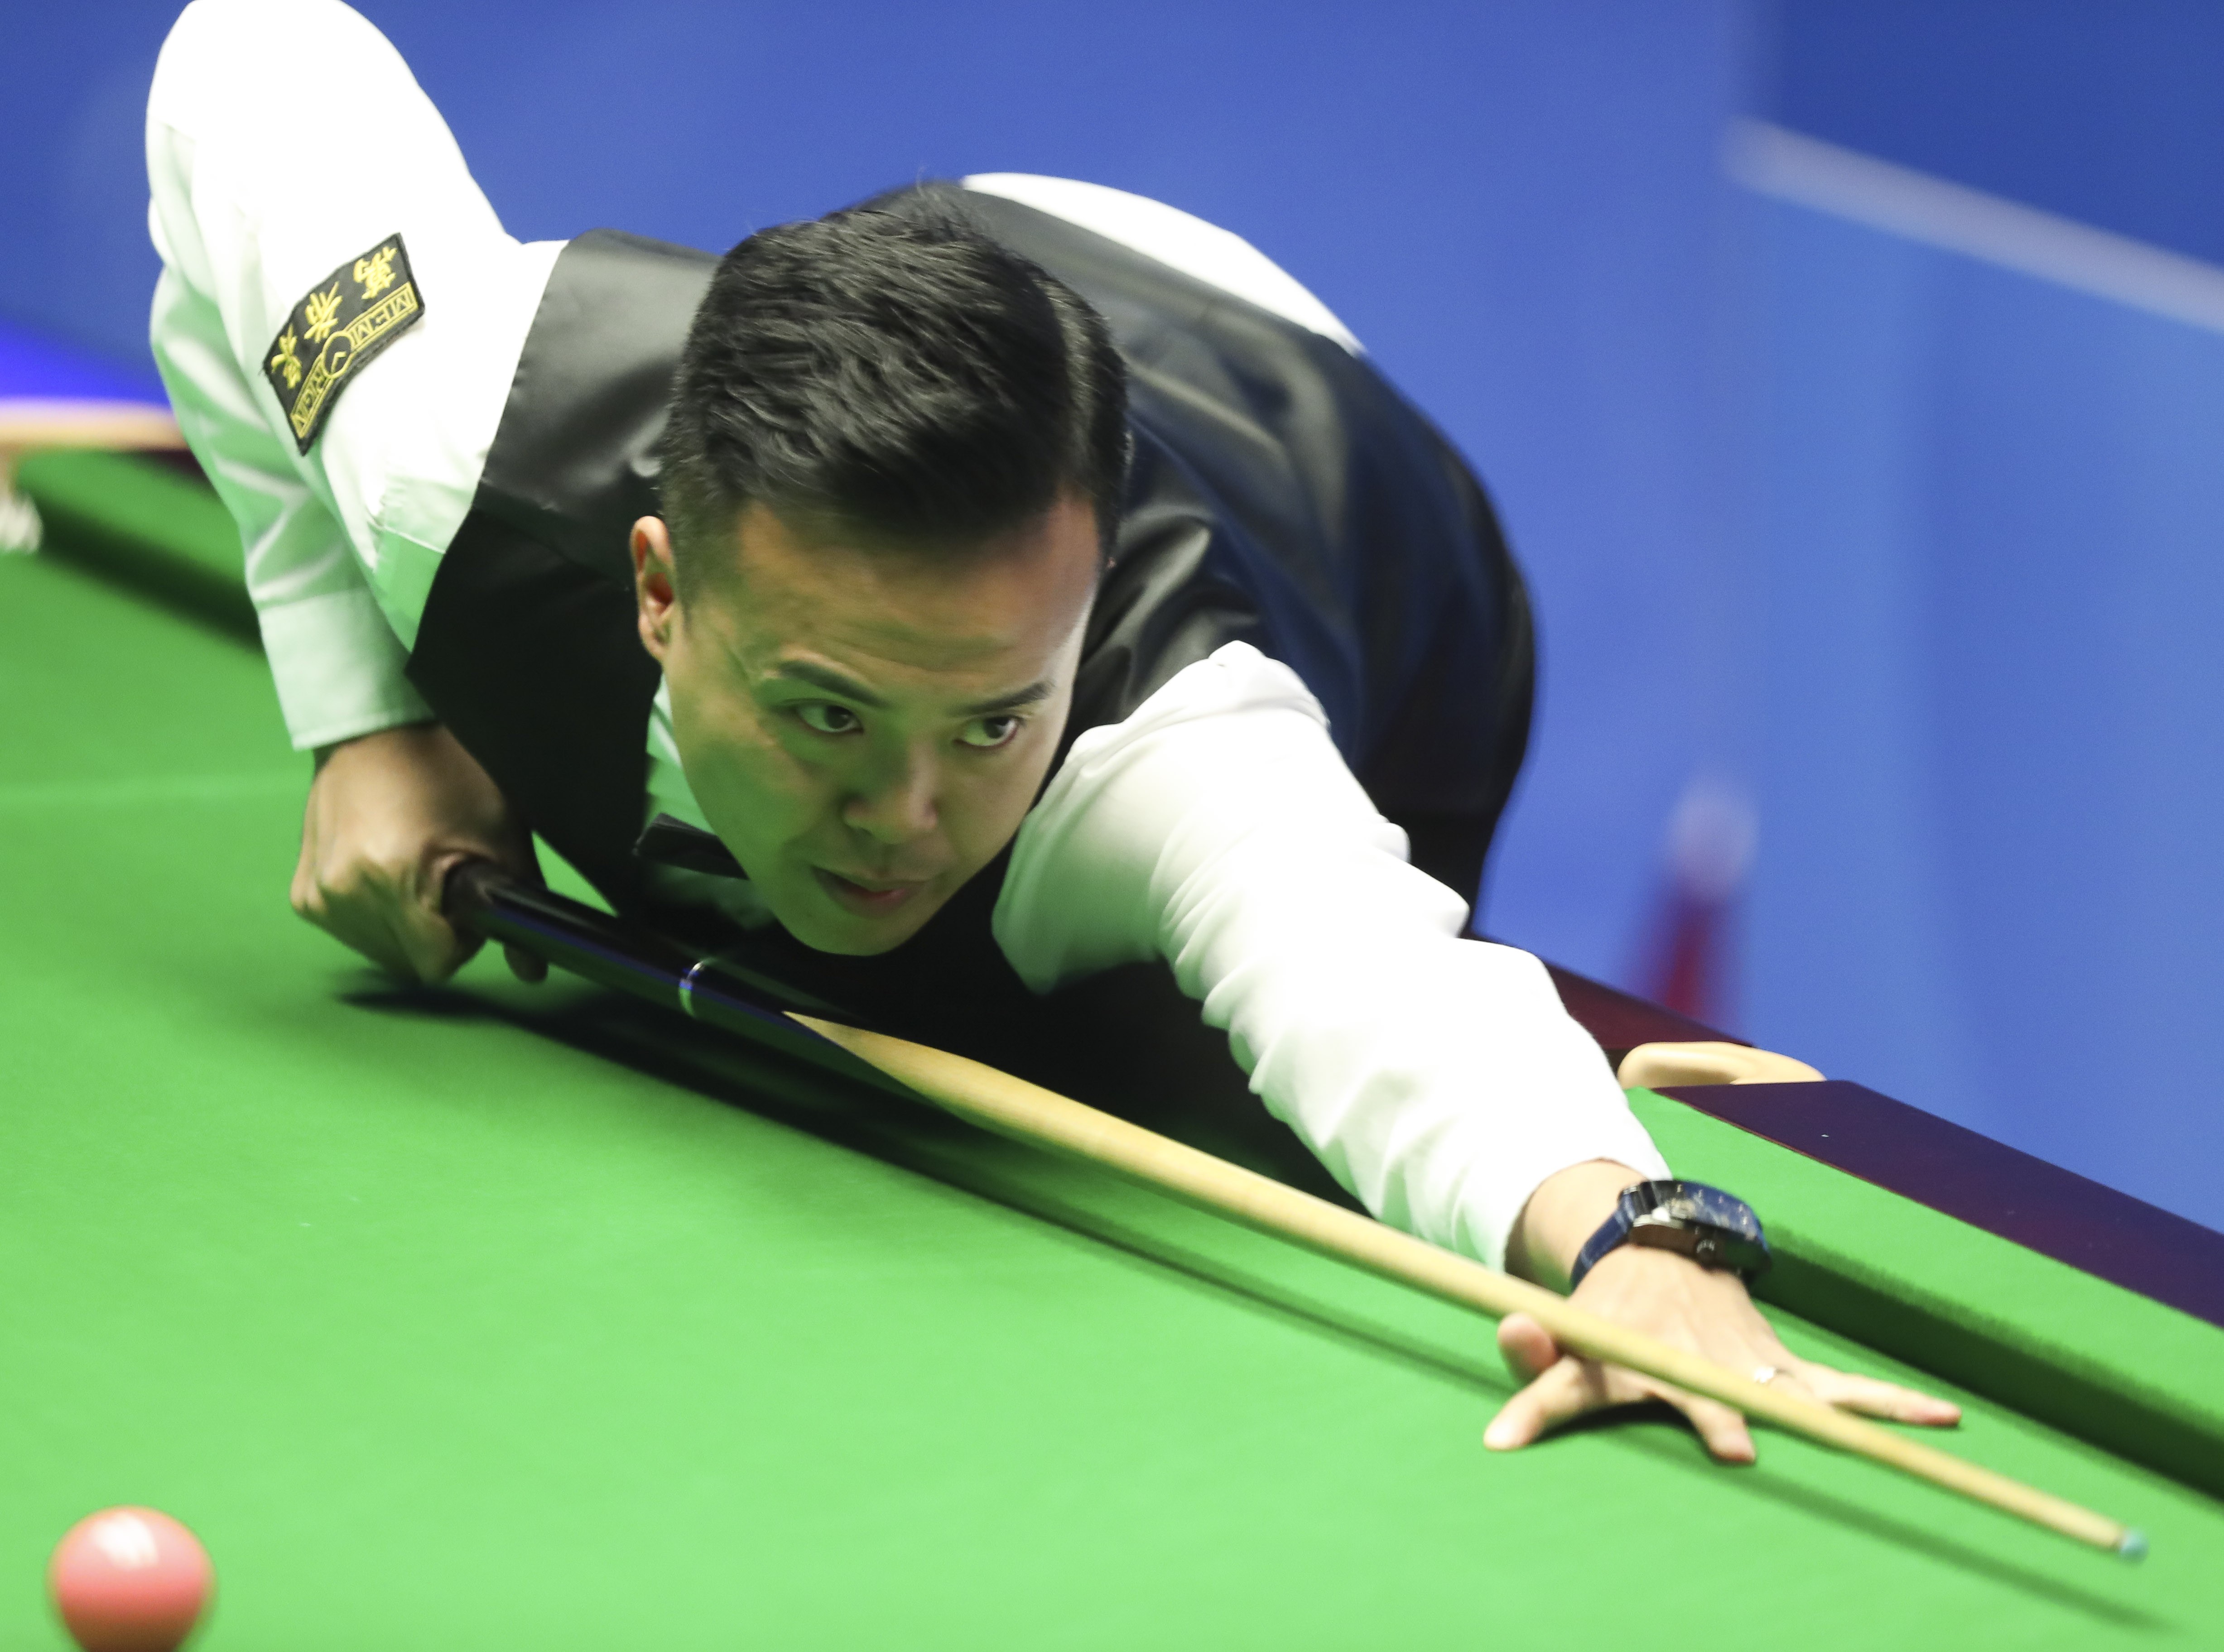 Marco Fu Ka-chun of Hong Kong of China competes during the first round match with Lyu Haotian of China at the World Snooker Championship 2018 at the Crucible Theatre in Sheffield. Photo: Xinhua